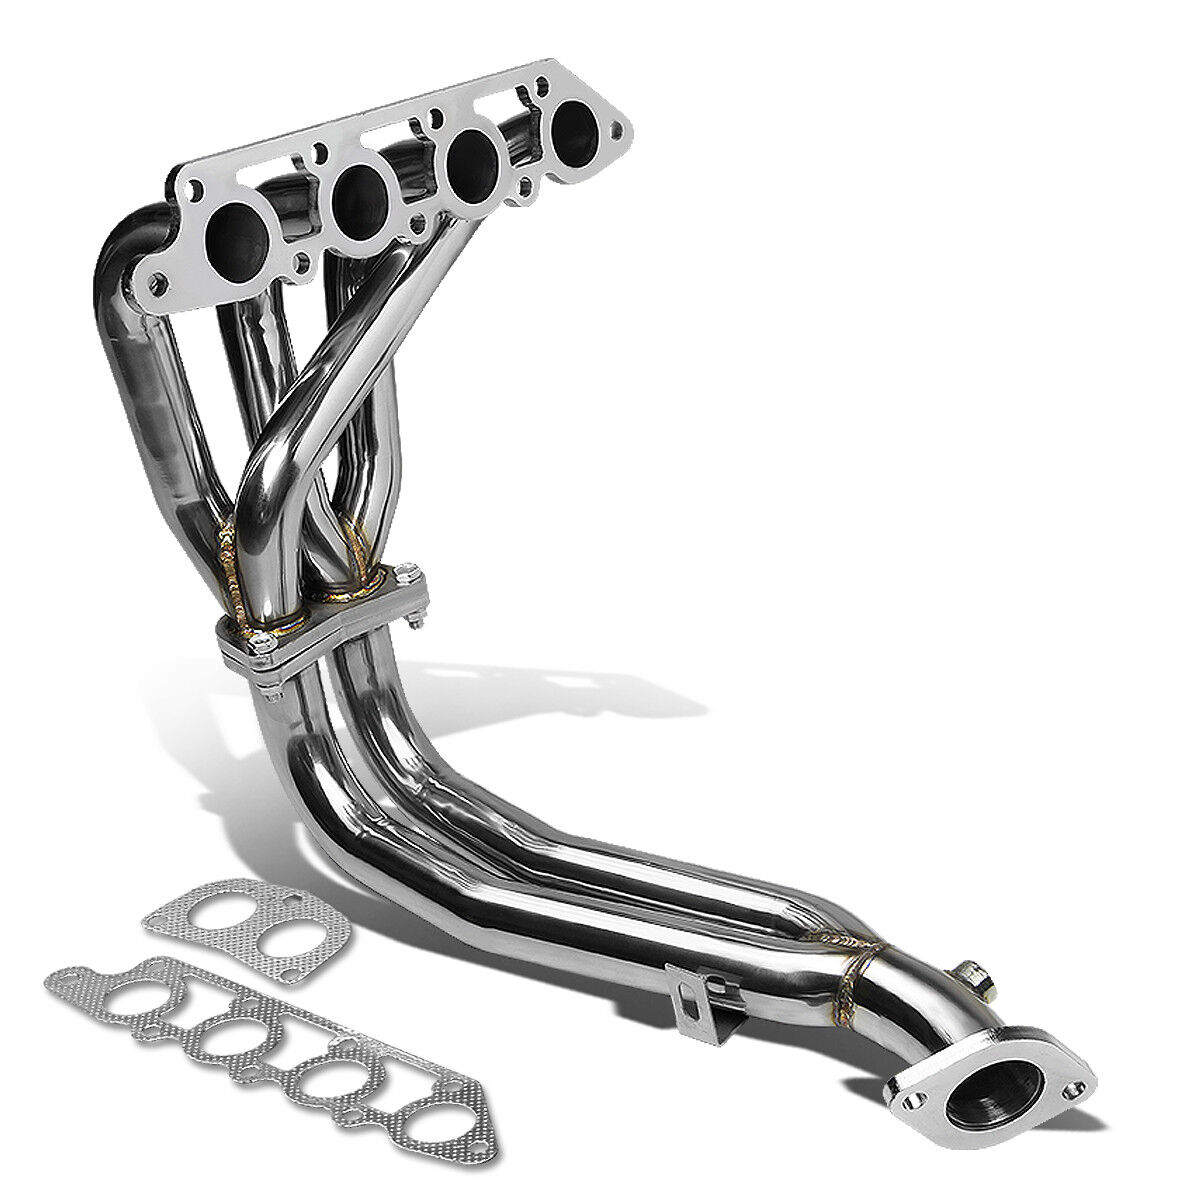 FOR 98-02 FORD ESCORT ZX2 S/R 2.0 STAINLESS T304 EXHAUST 4-1 HEADER/MANIFOLD